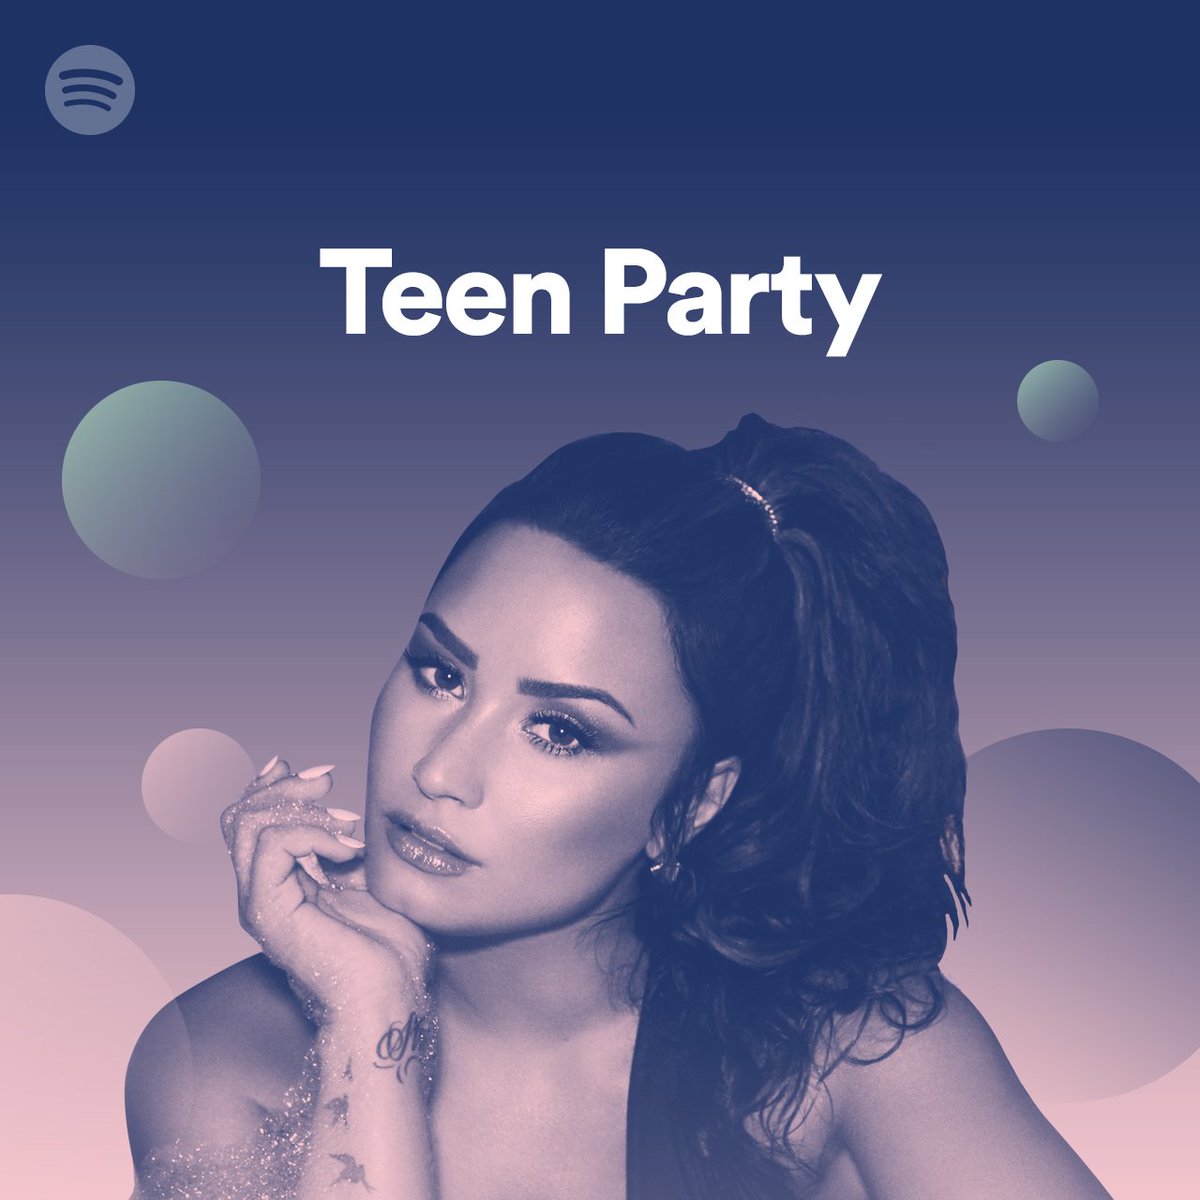 Took over the #TeenParty playlist on @Spotify and added a few of my favorite songs!! https://t.co/ftddkKTwgN https://t.co/gqEKGdGDnj